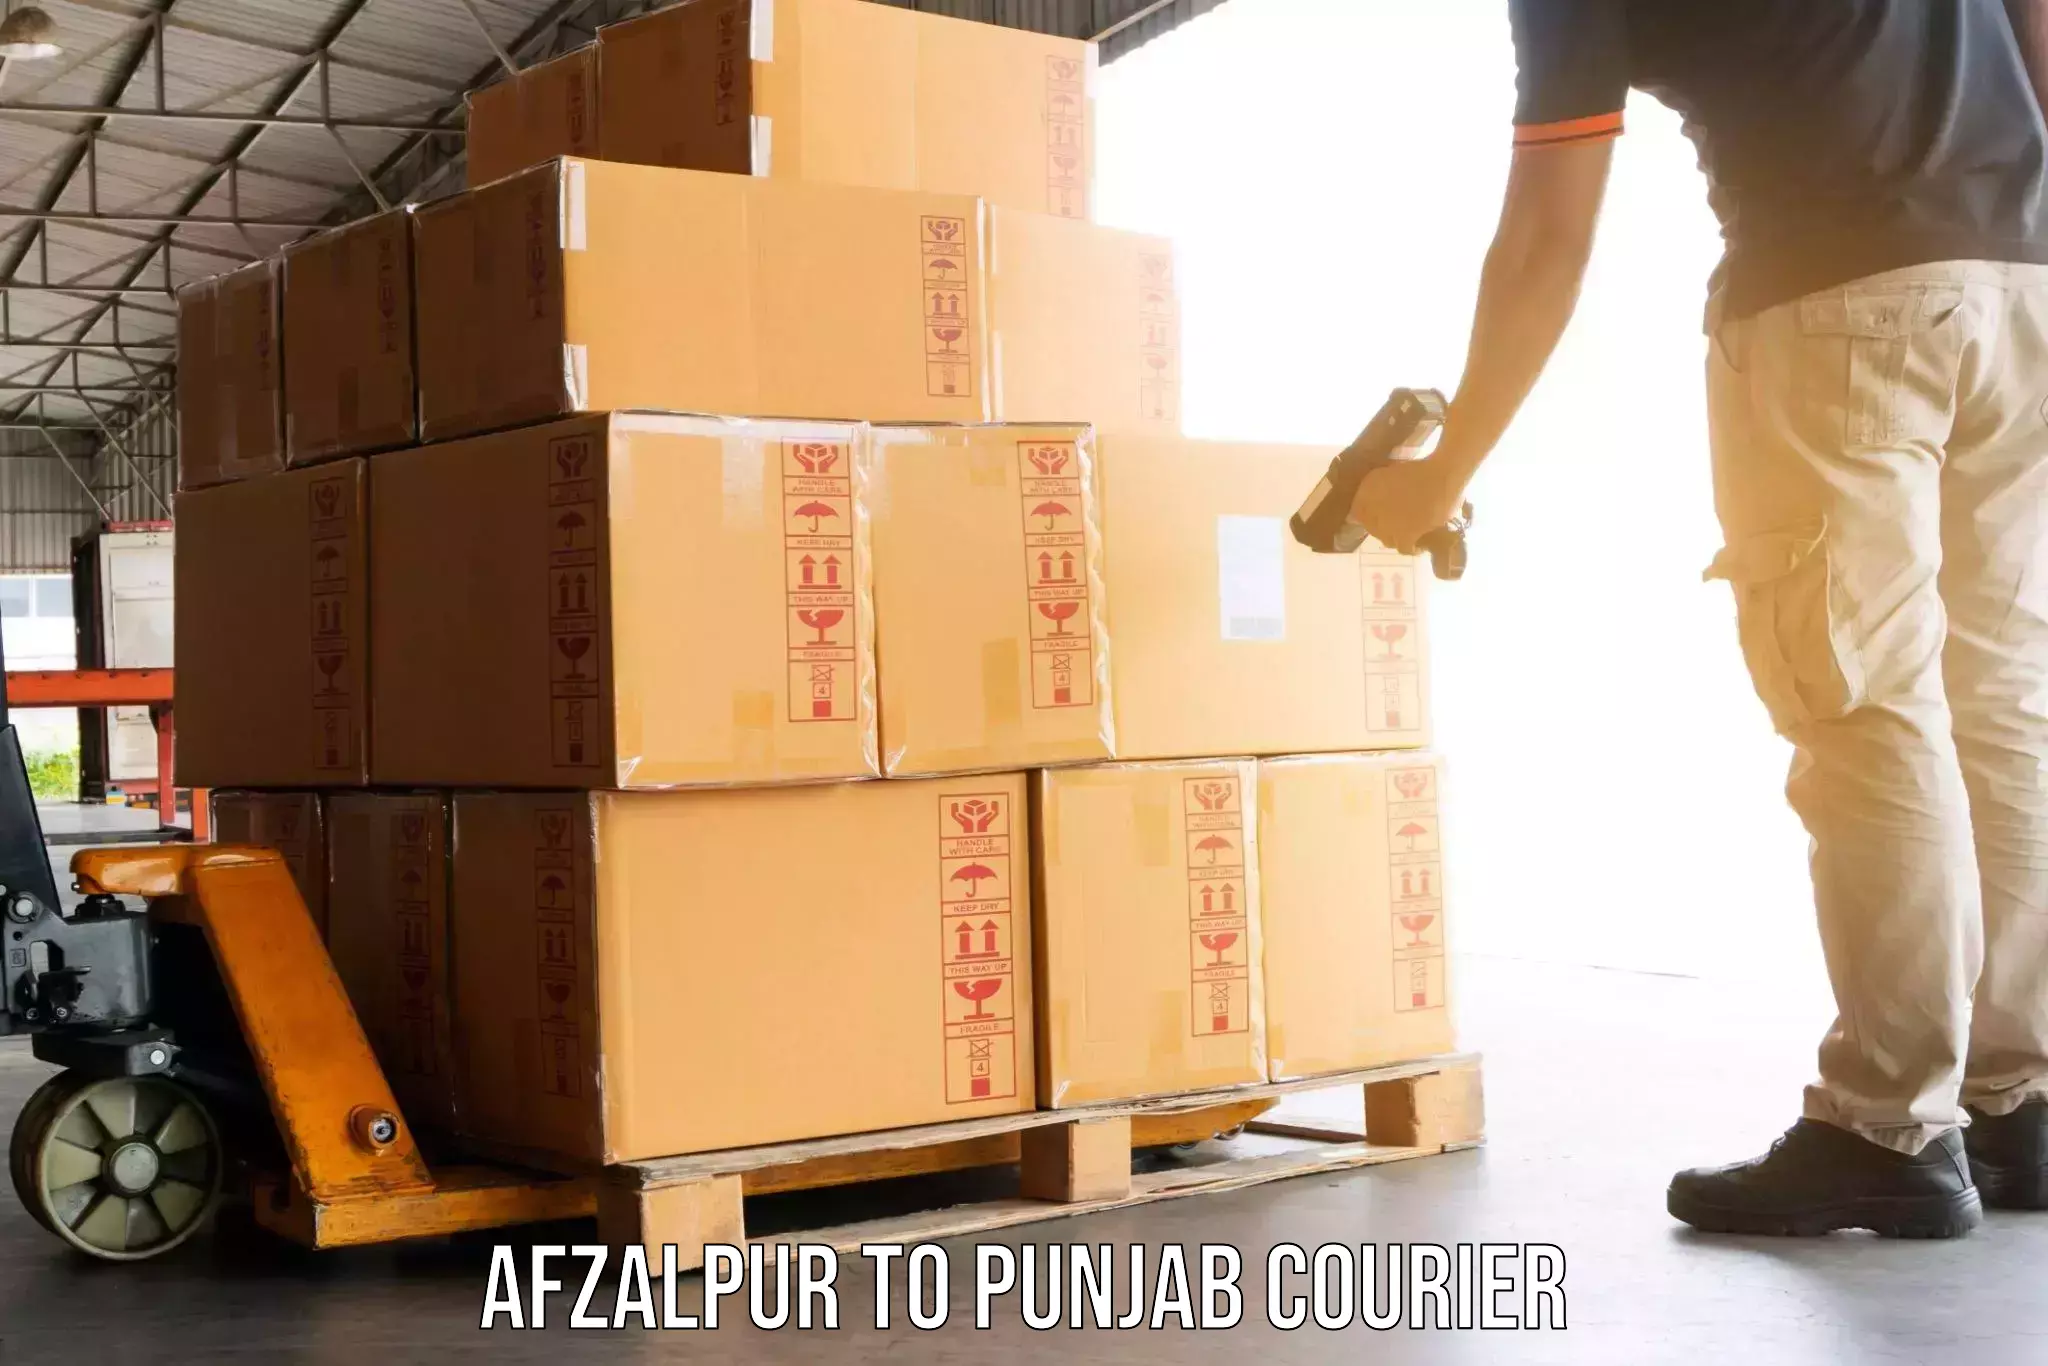 Professional packing services Afzalpur to Faridkot